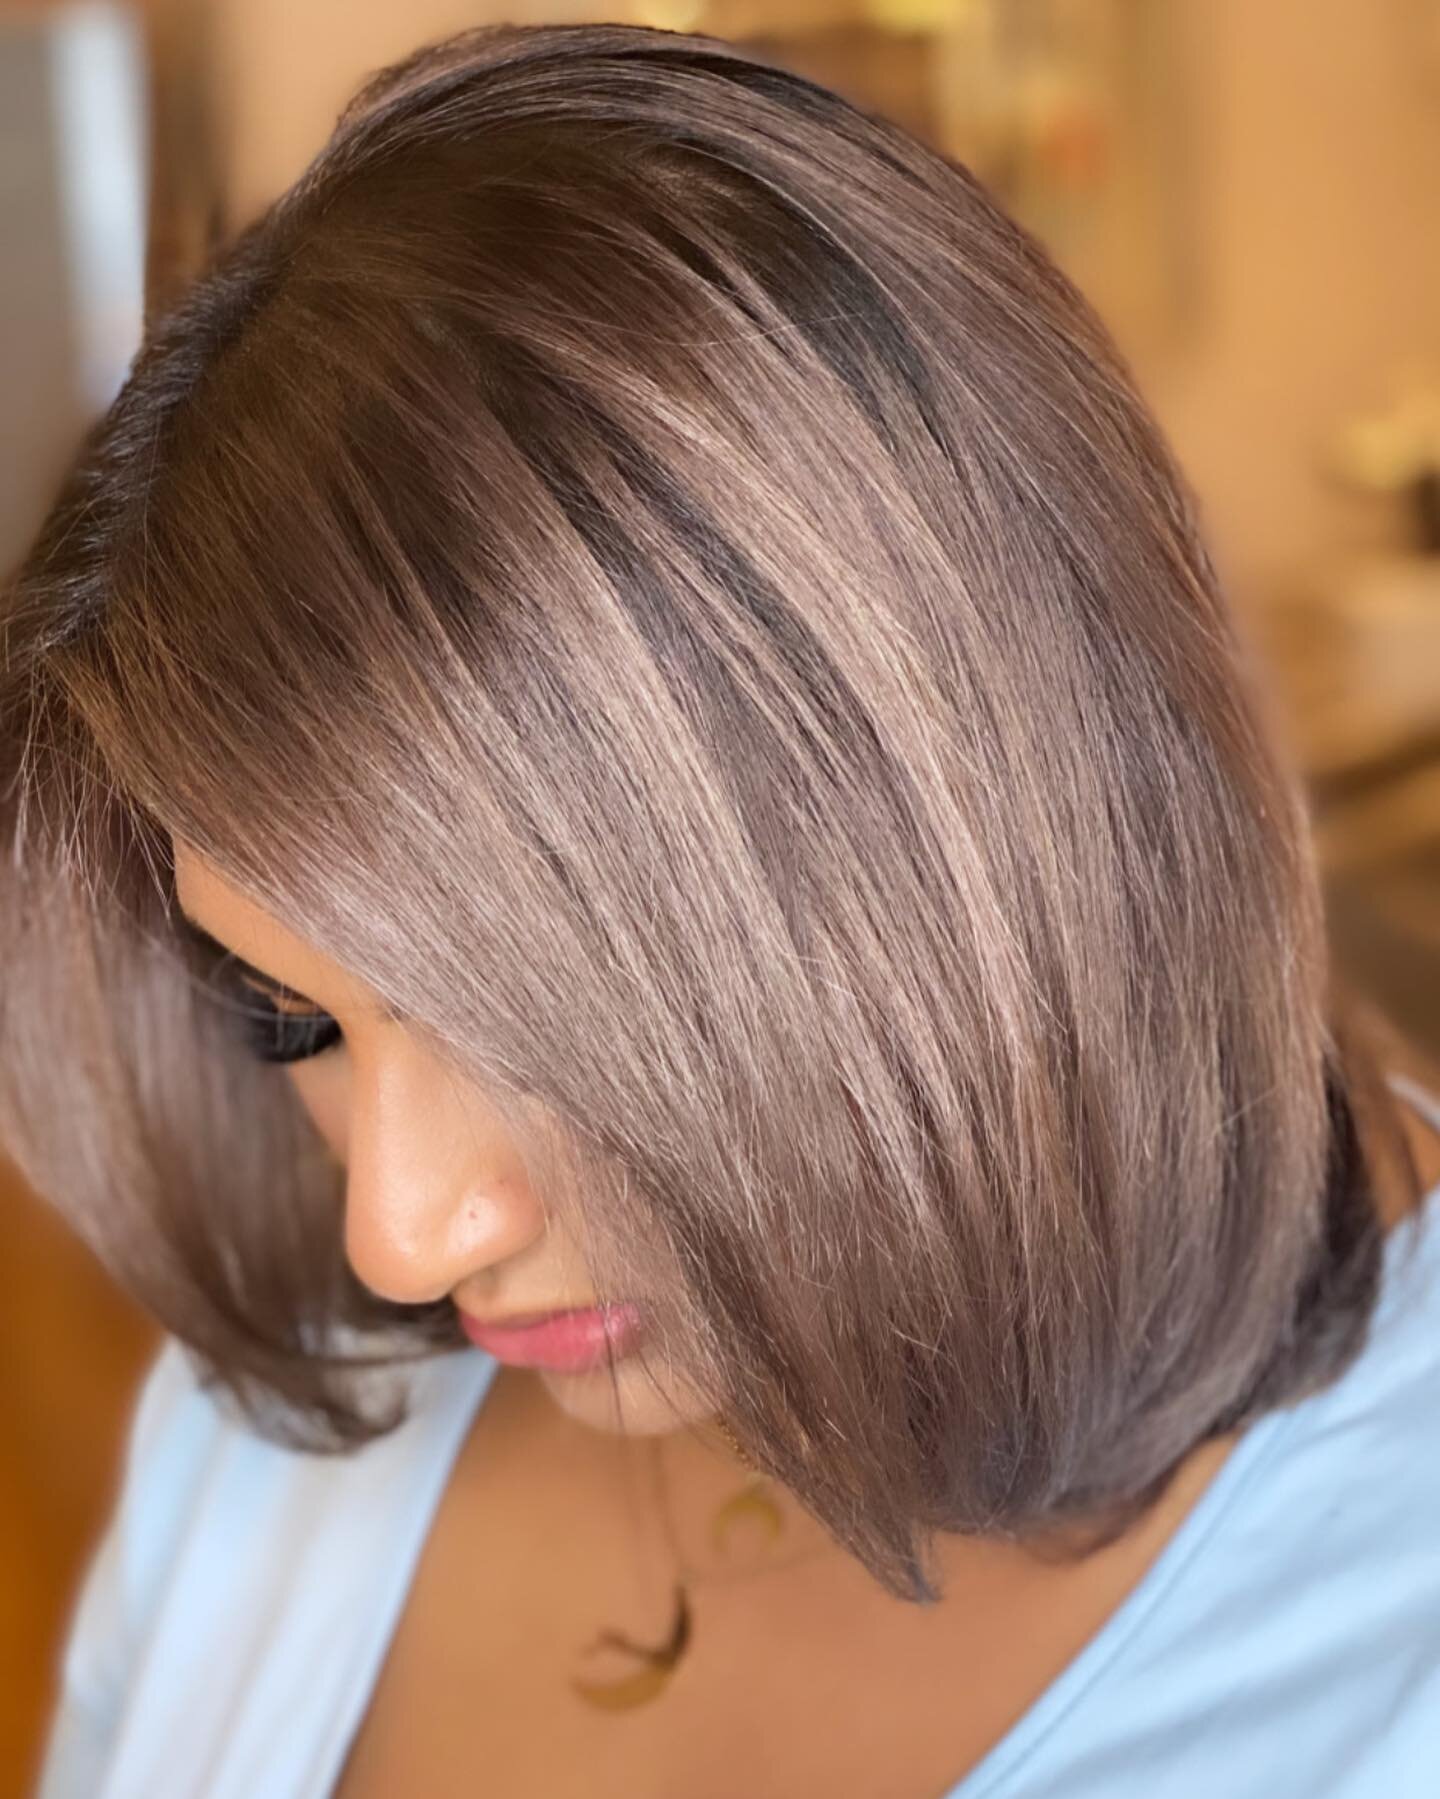 Look at 👀this beautiful Silver gloss from @redken Shades EQ. This salon service provides a subtle touch of color to leave hair super shiny and conditioned. Hair glosses last 4-6 weeks and can be done in just 20 minutes! These types of hair toners ar